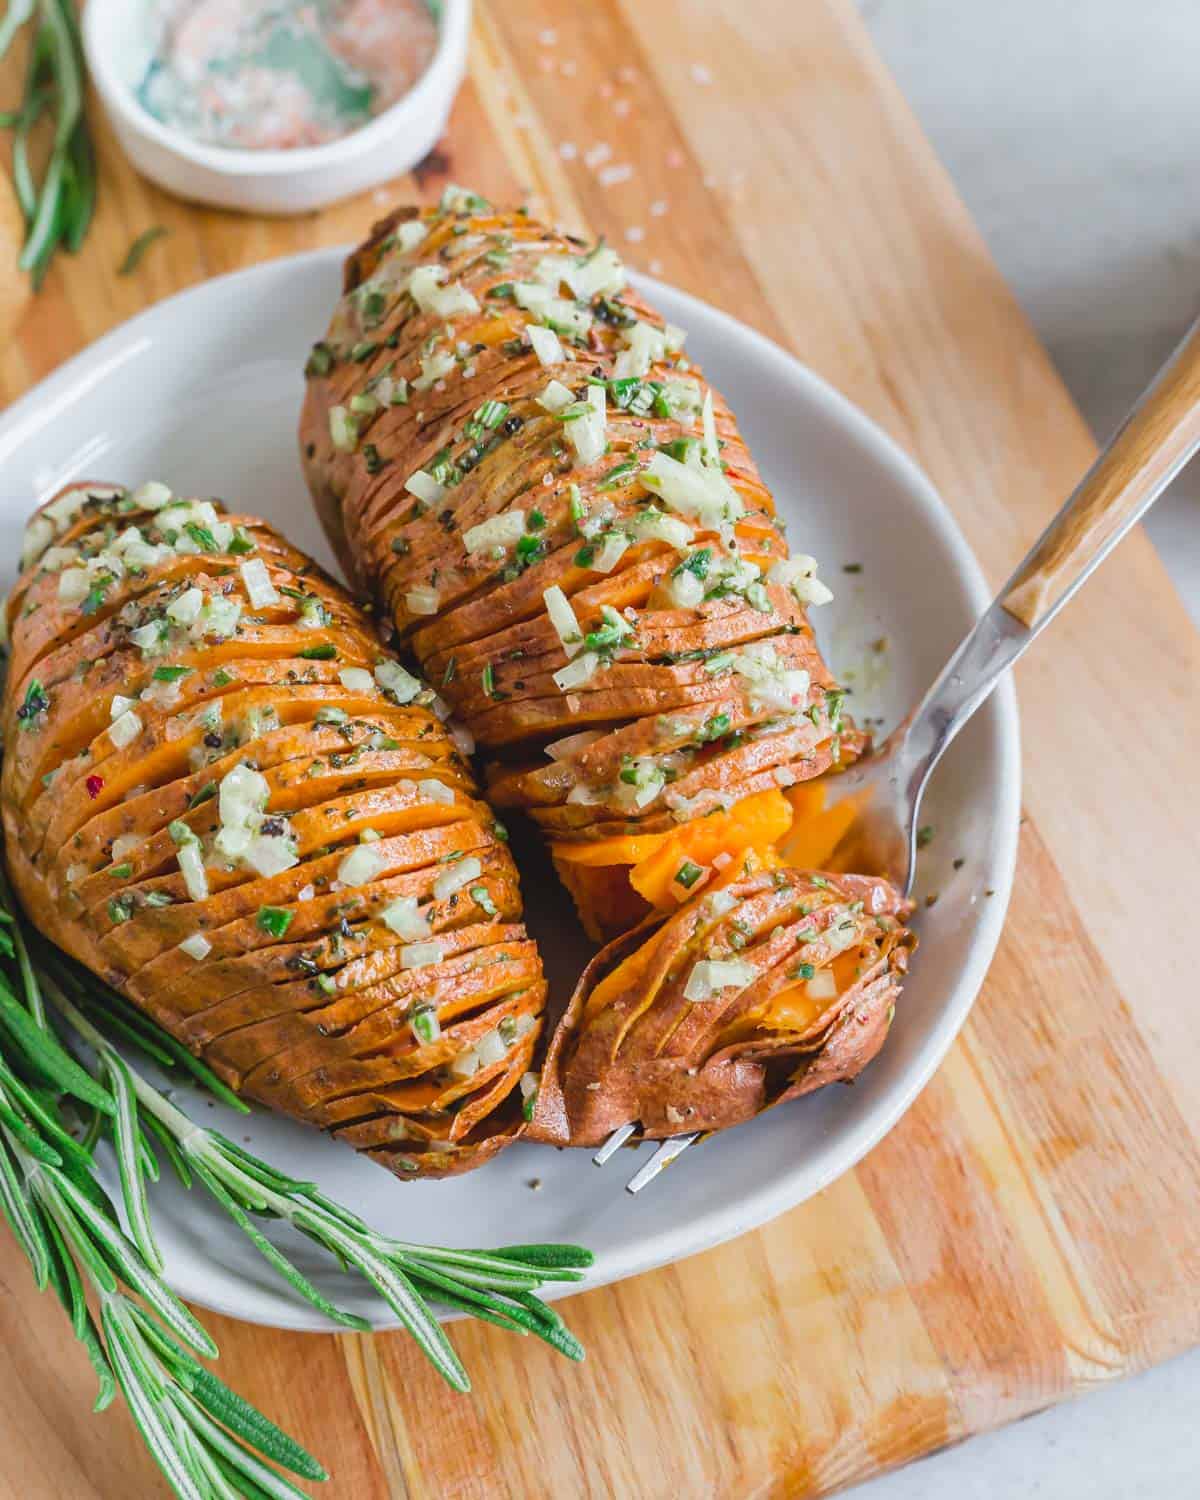 Vegan hasselback sweet potatoes with rosemary mustard shallot dressing on a plate with a fork.